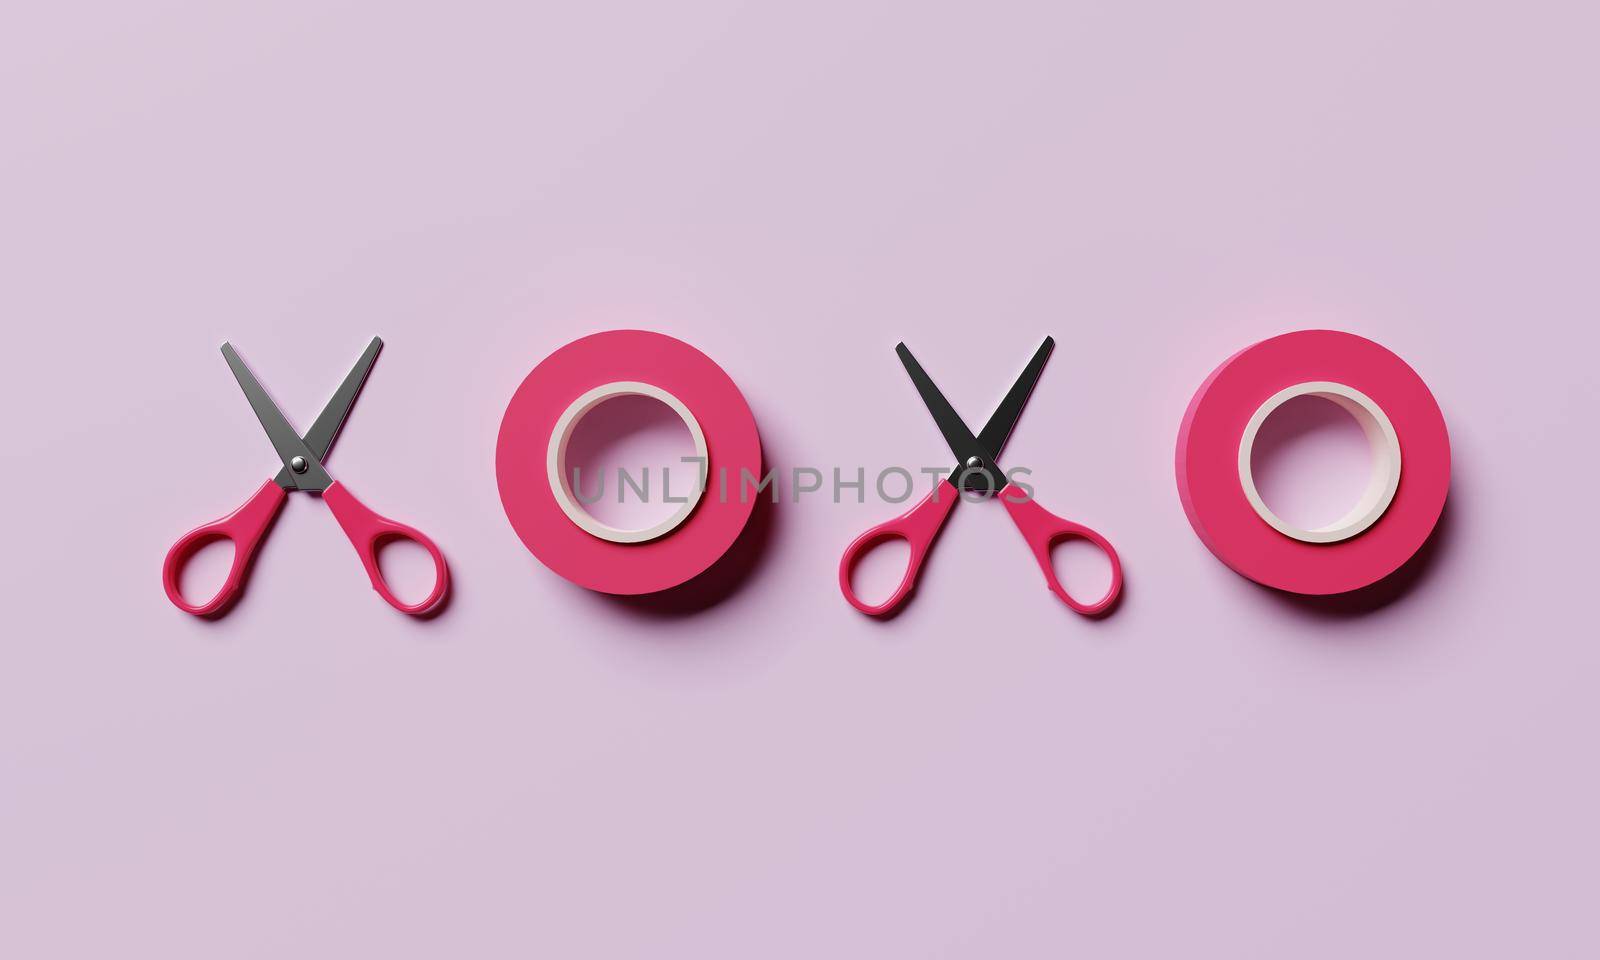 XOXO symbol is an abbreviation for hugs and kisses by scissors and ribbon tape on pink background. Love affection and Valentine's day concept. 3D illustration rendering by MiniStocker